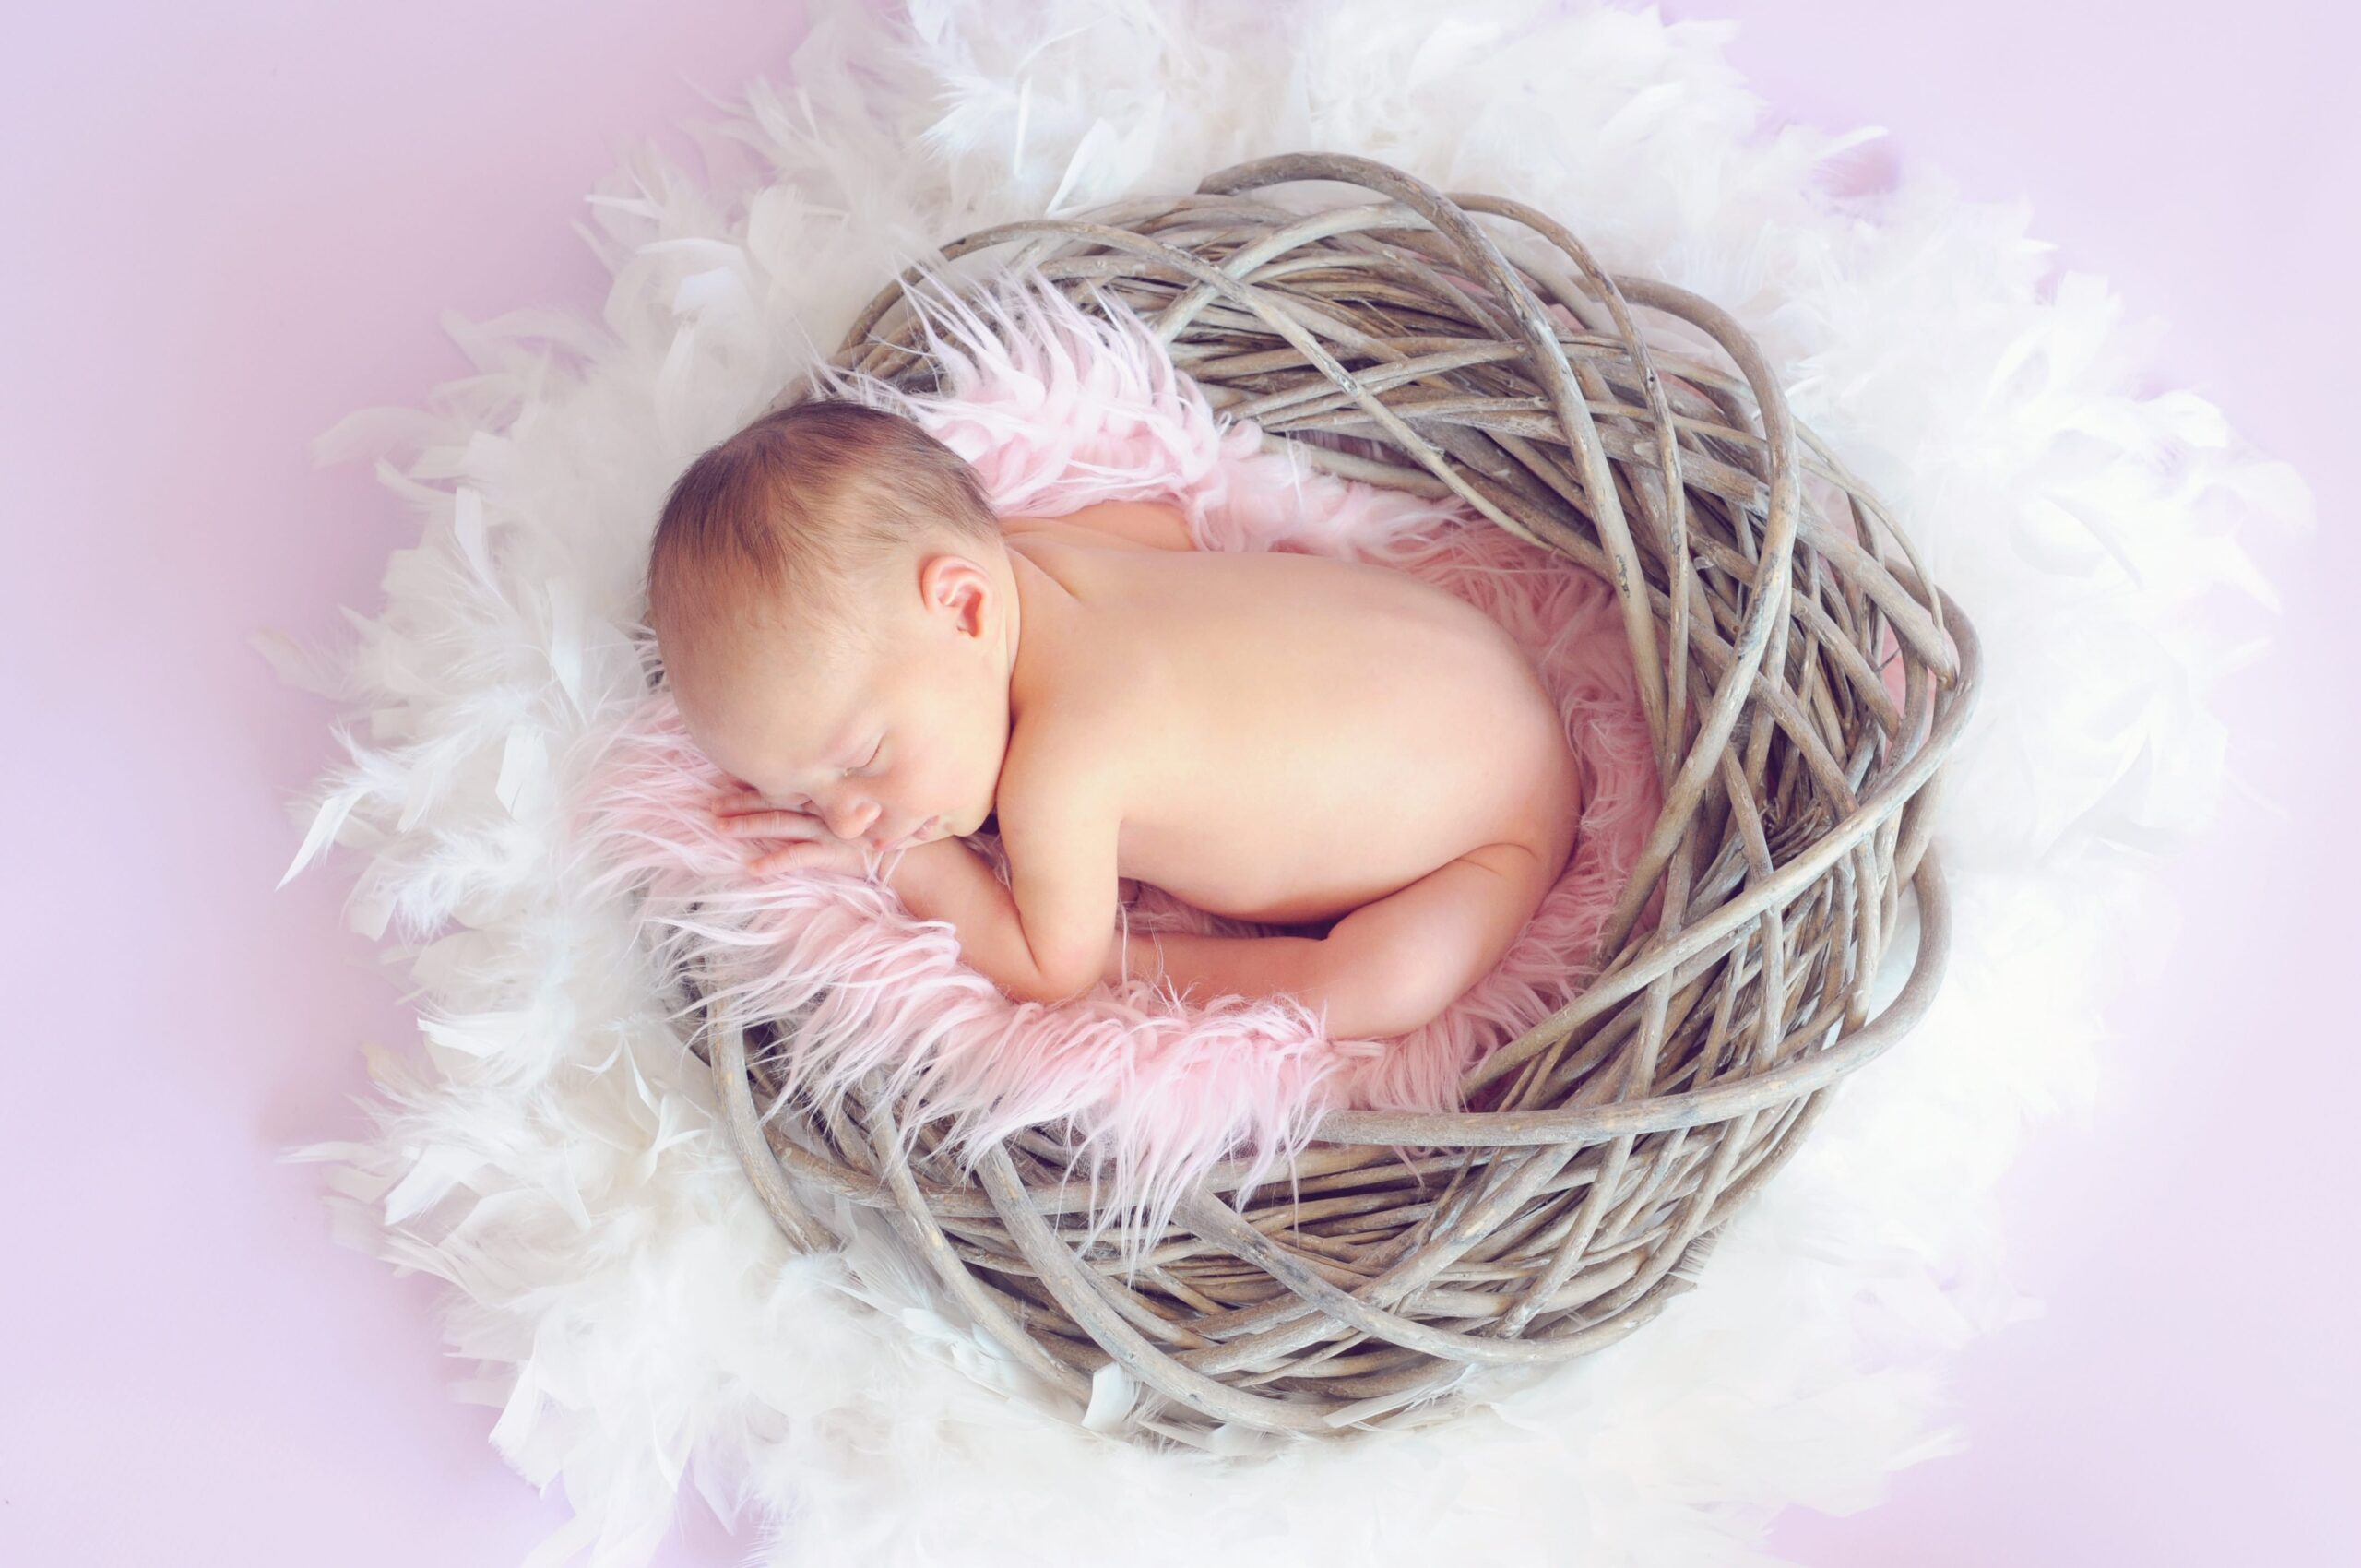 Newborn Photography Packages: What to Expect and How to Choose the Right One